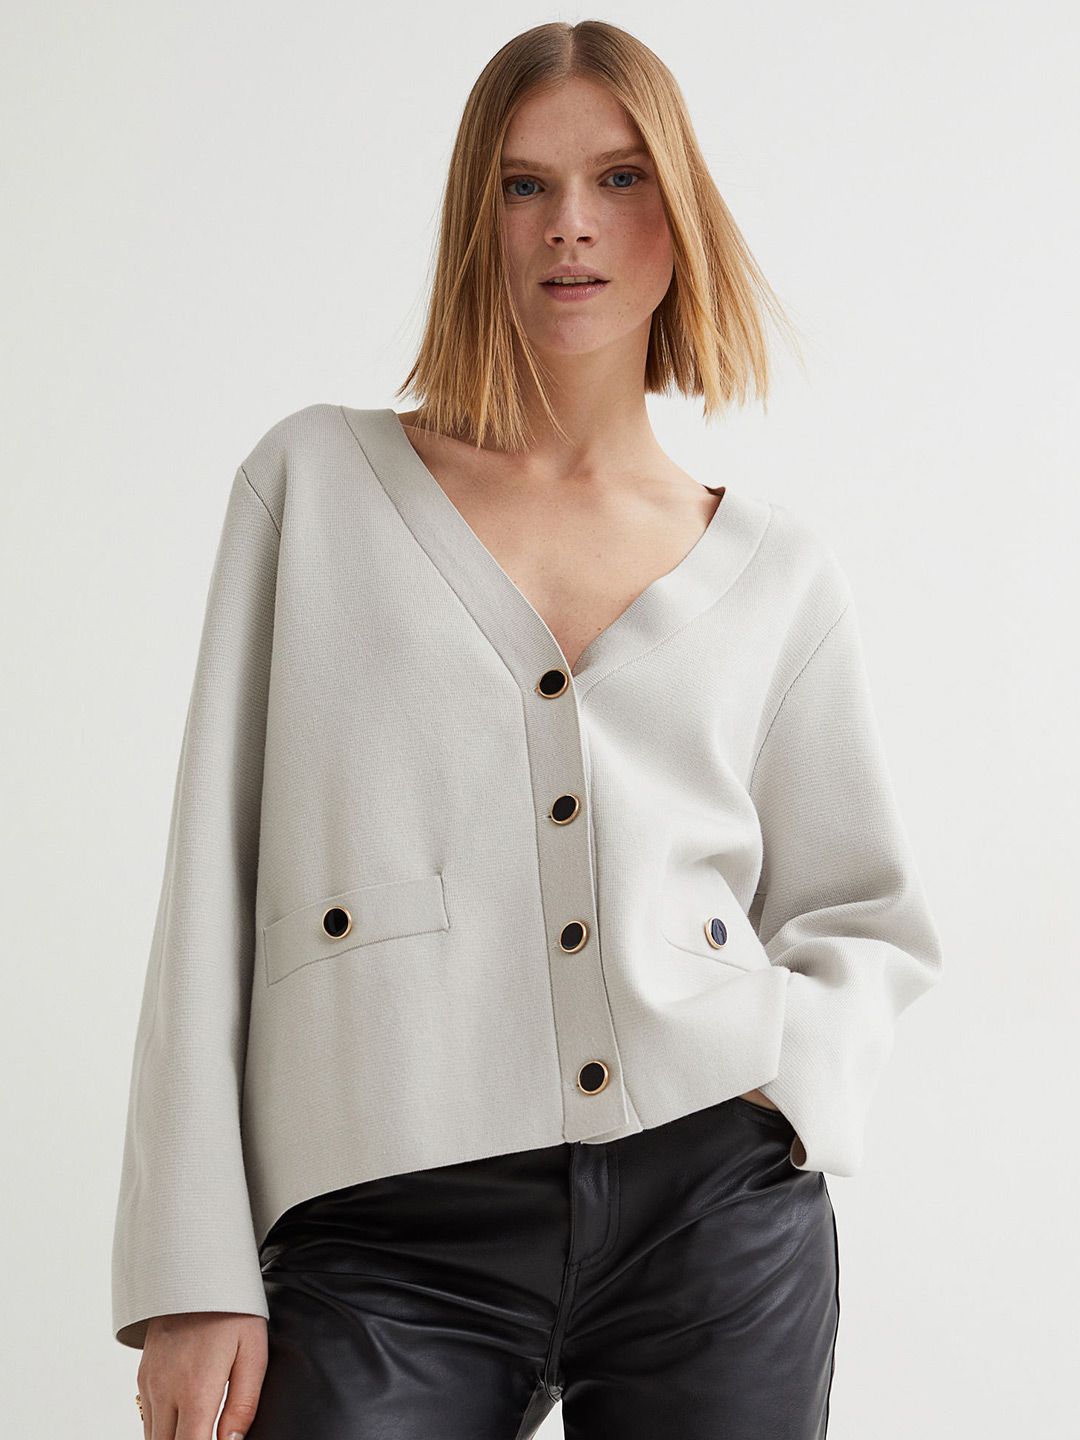 H&M Women Grey Solid Boxy-Style Cardigan Price in India